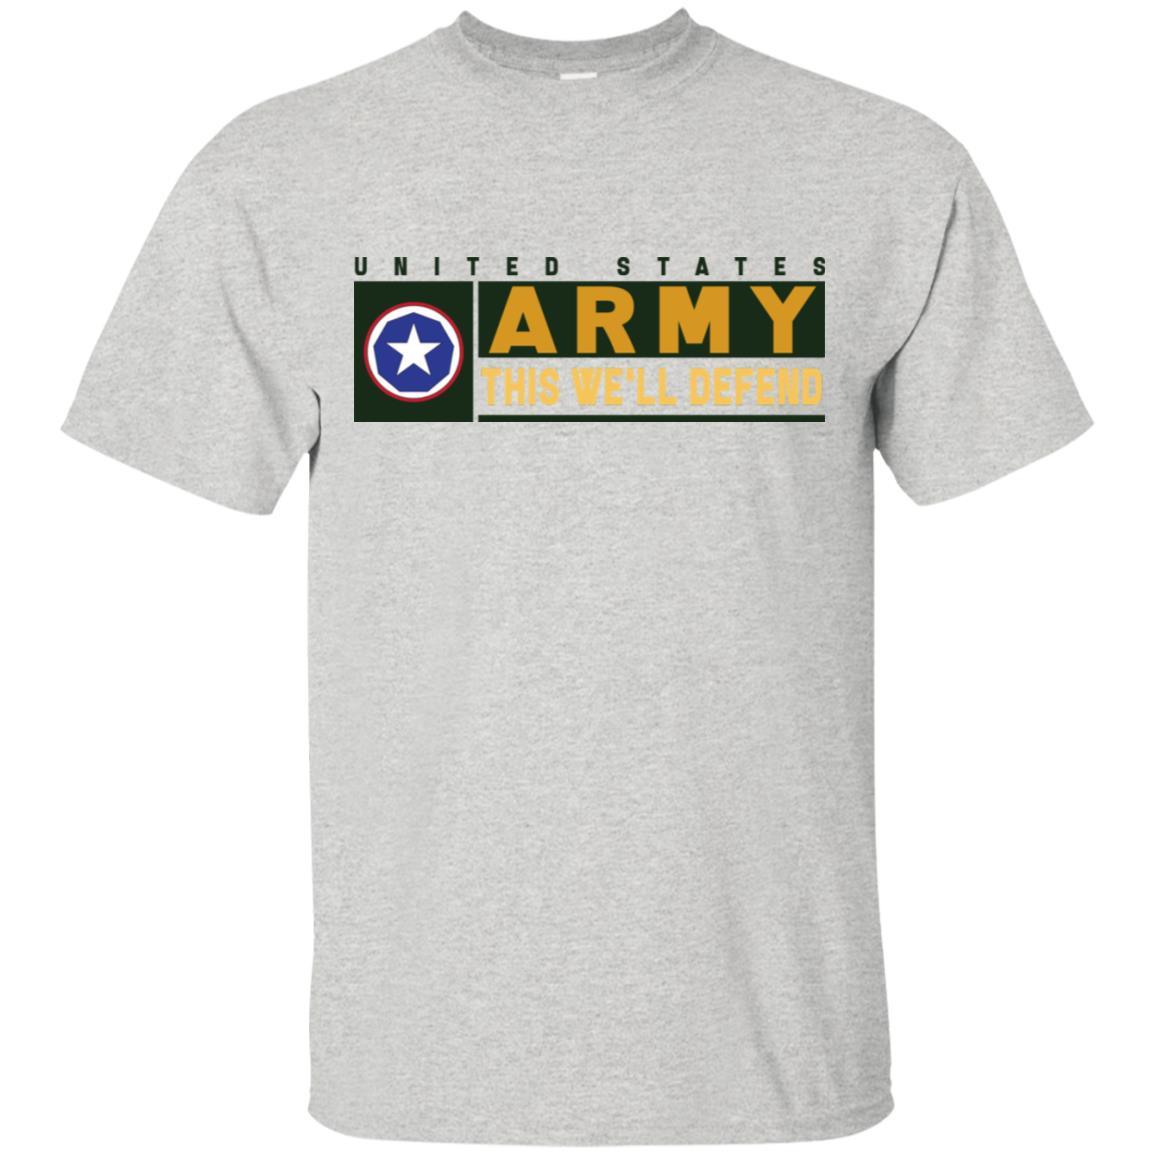 US Army 9TH SUPPORT COMMAND- This We'll Defend T-Shirt On Front For Men-TShirt-Army-Veterans Nation